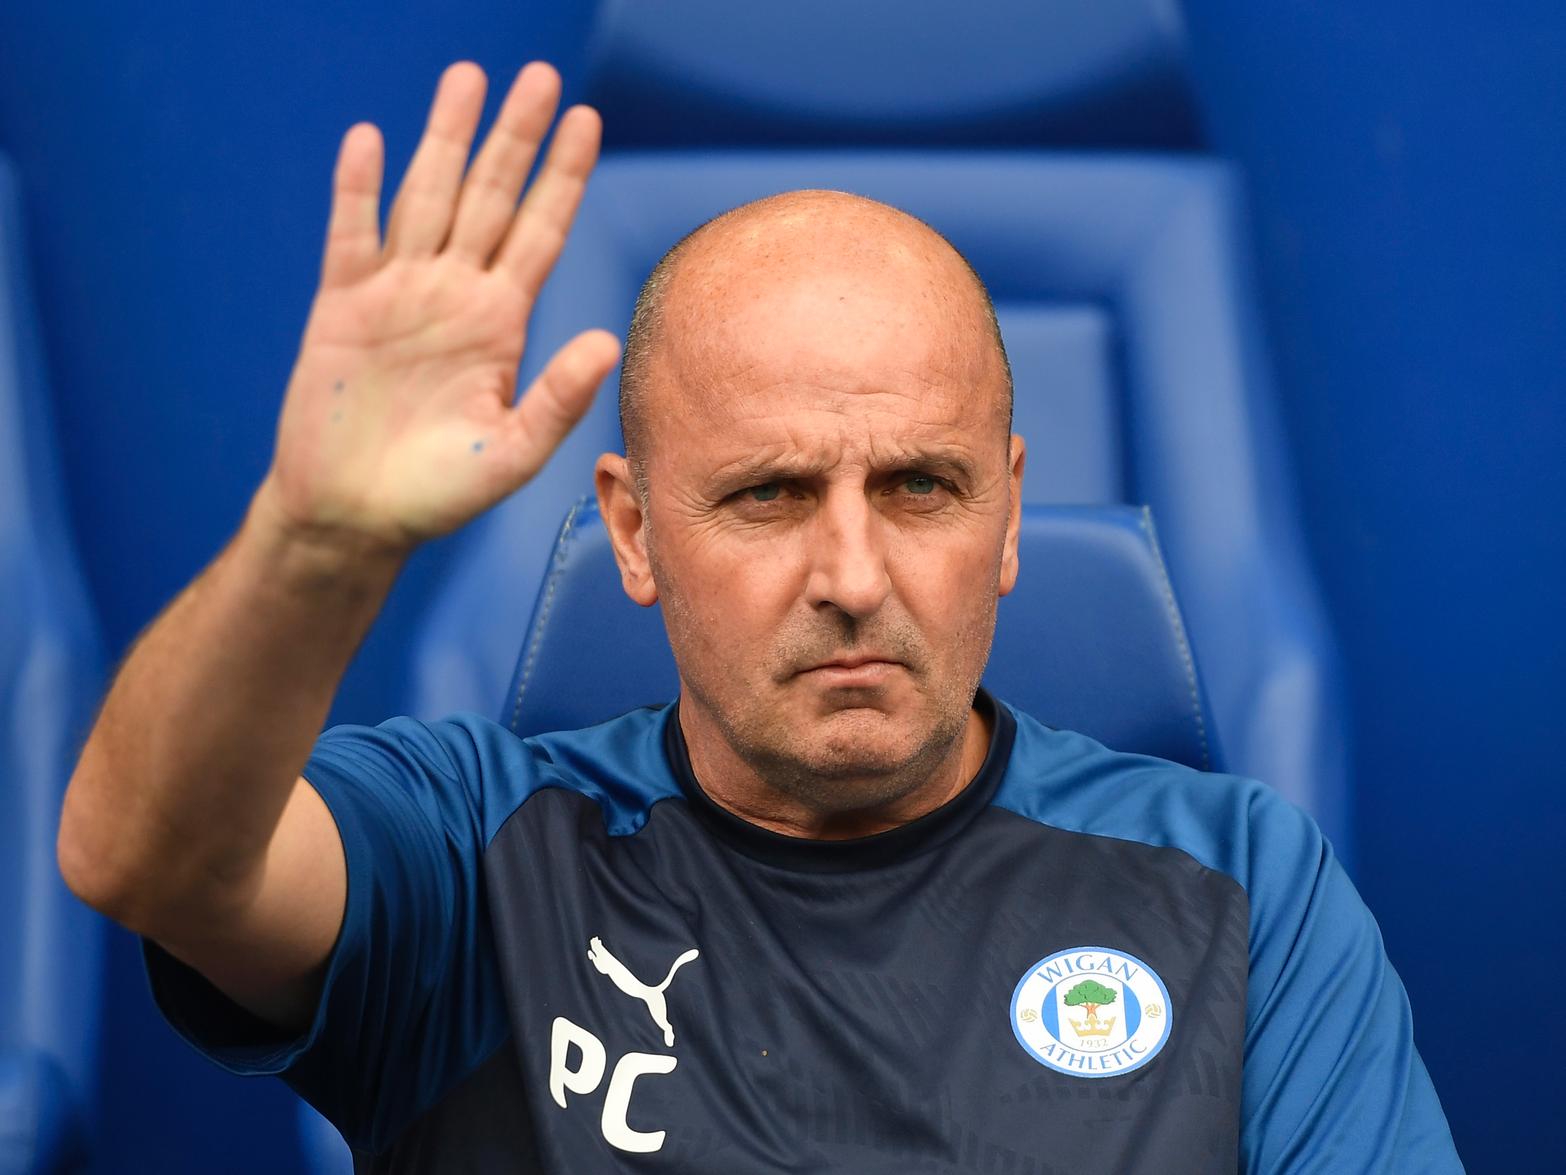 Wigan Athletic manager Paul Cook is currently the bookies' favourite to take the vacant manager position at Sunderland, although he faces stiff competition from ex-Barnsley boss Daniel Stendel. (Wigan Today)